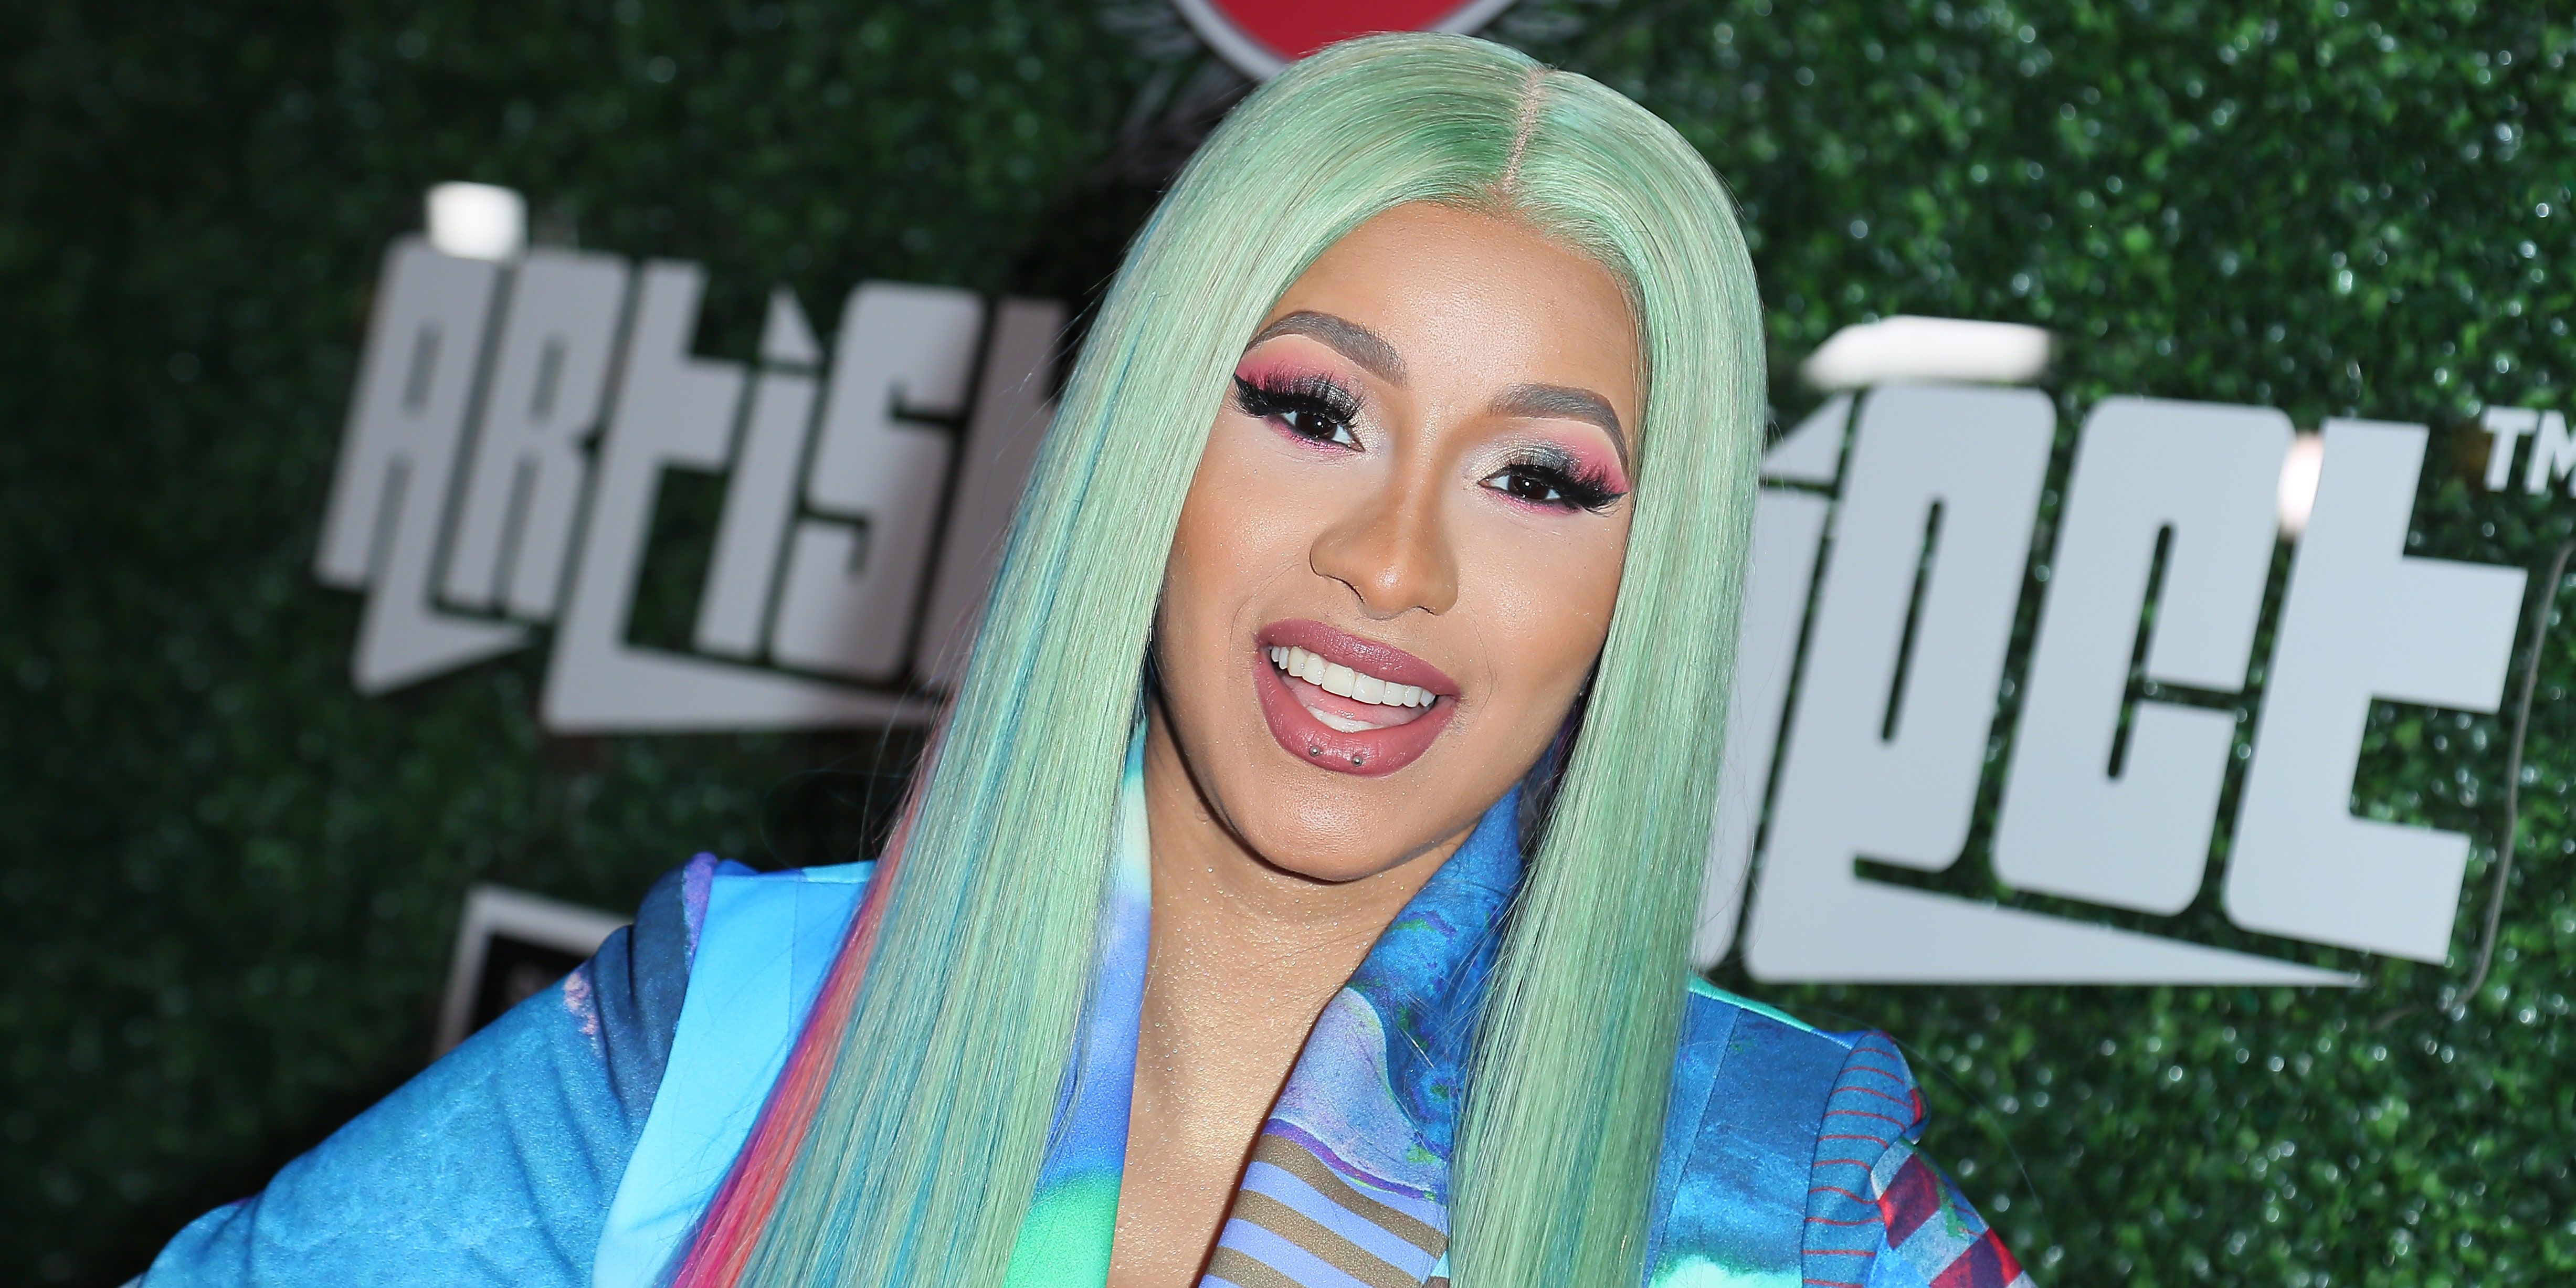 Cardi B and Megan Thee Stallion's “WAP” Video Takes Us for a Ride